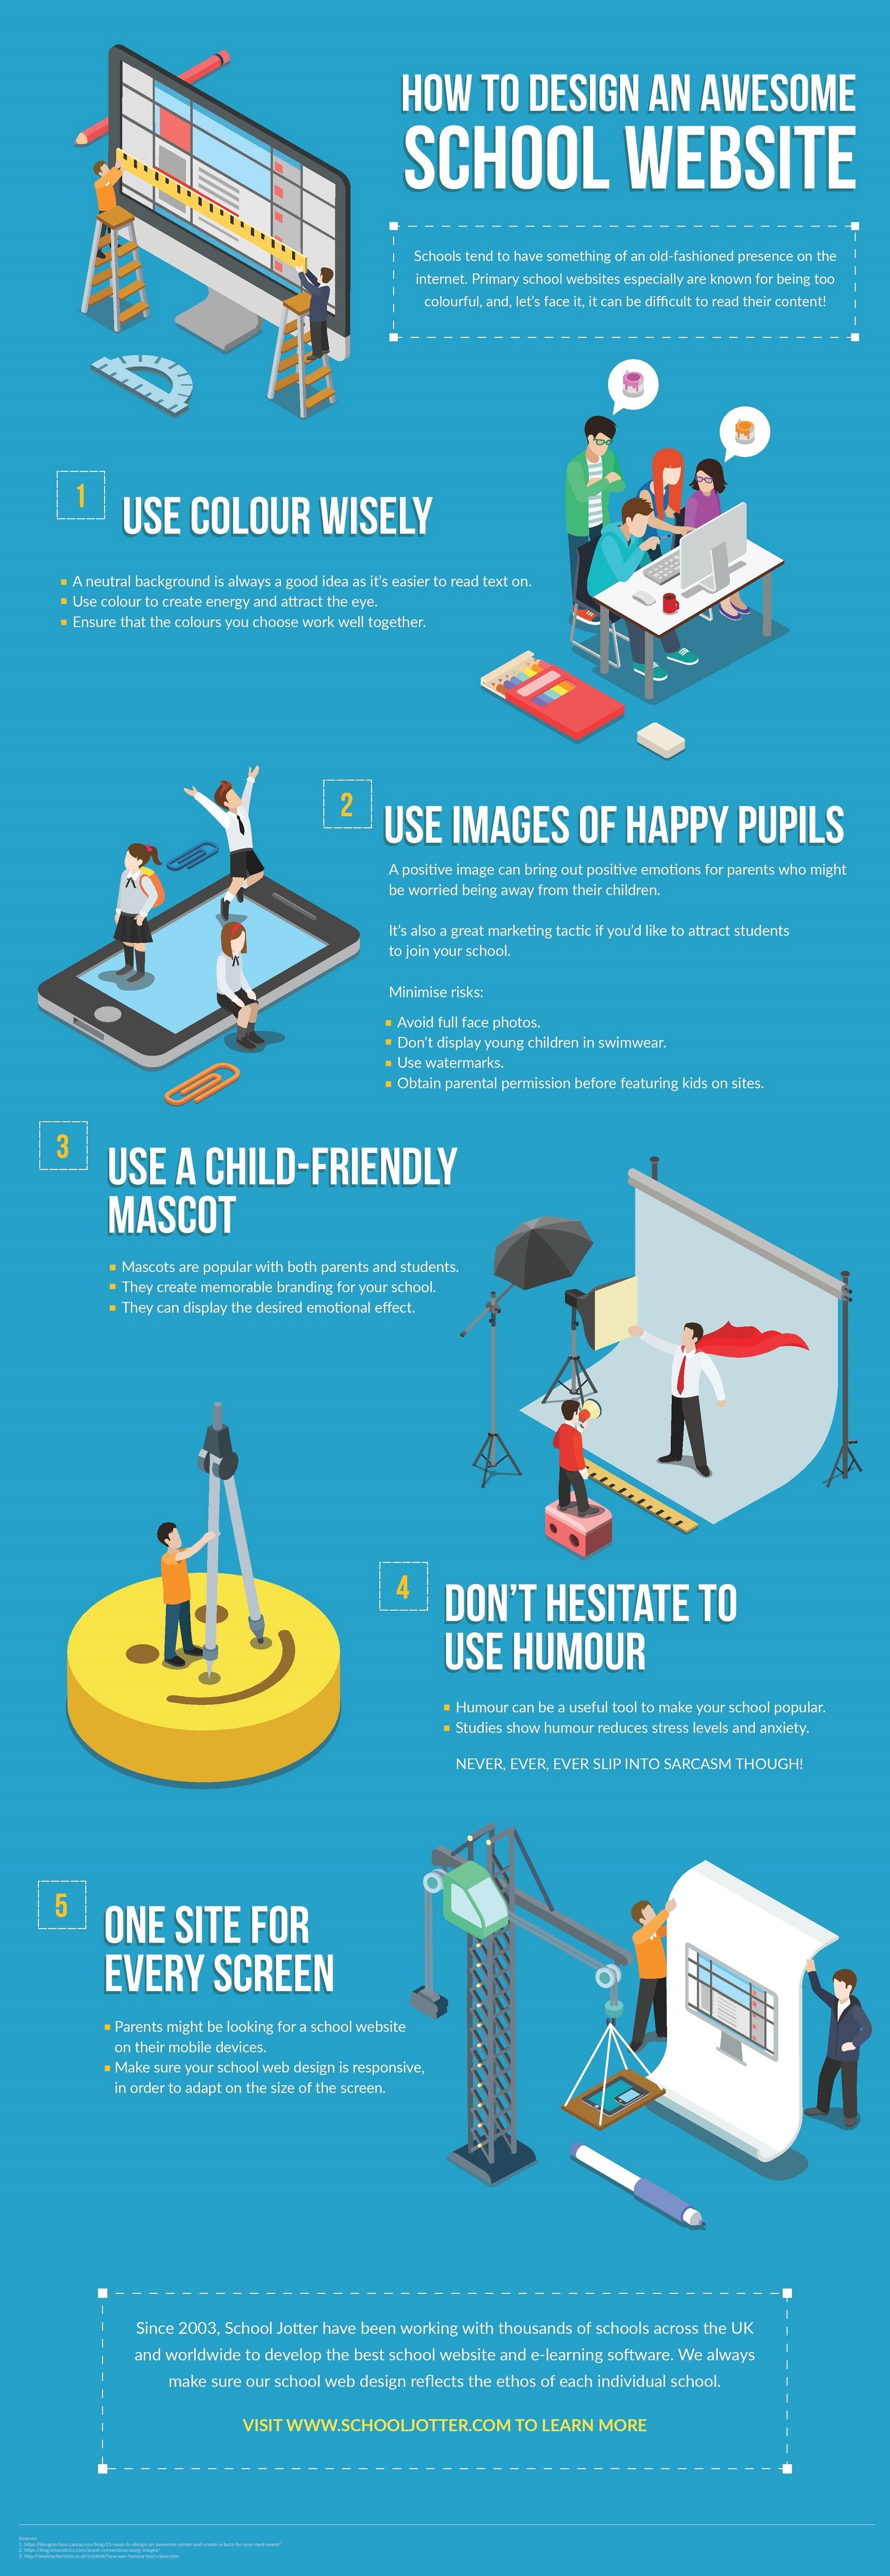 How to Design an Awesome School Website Infographic